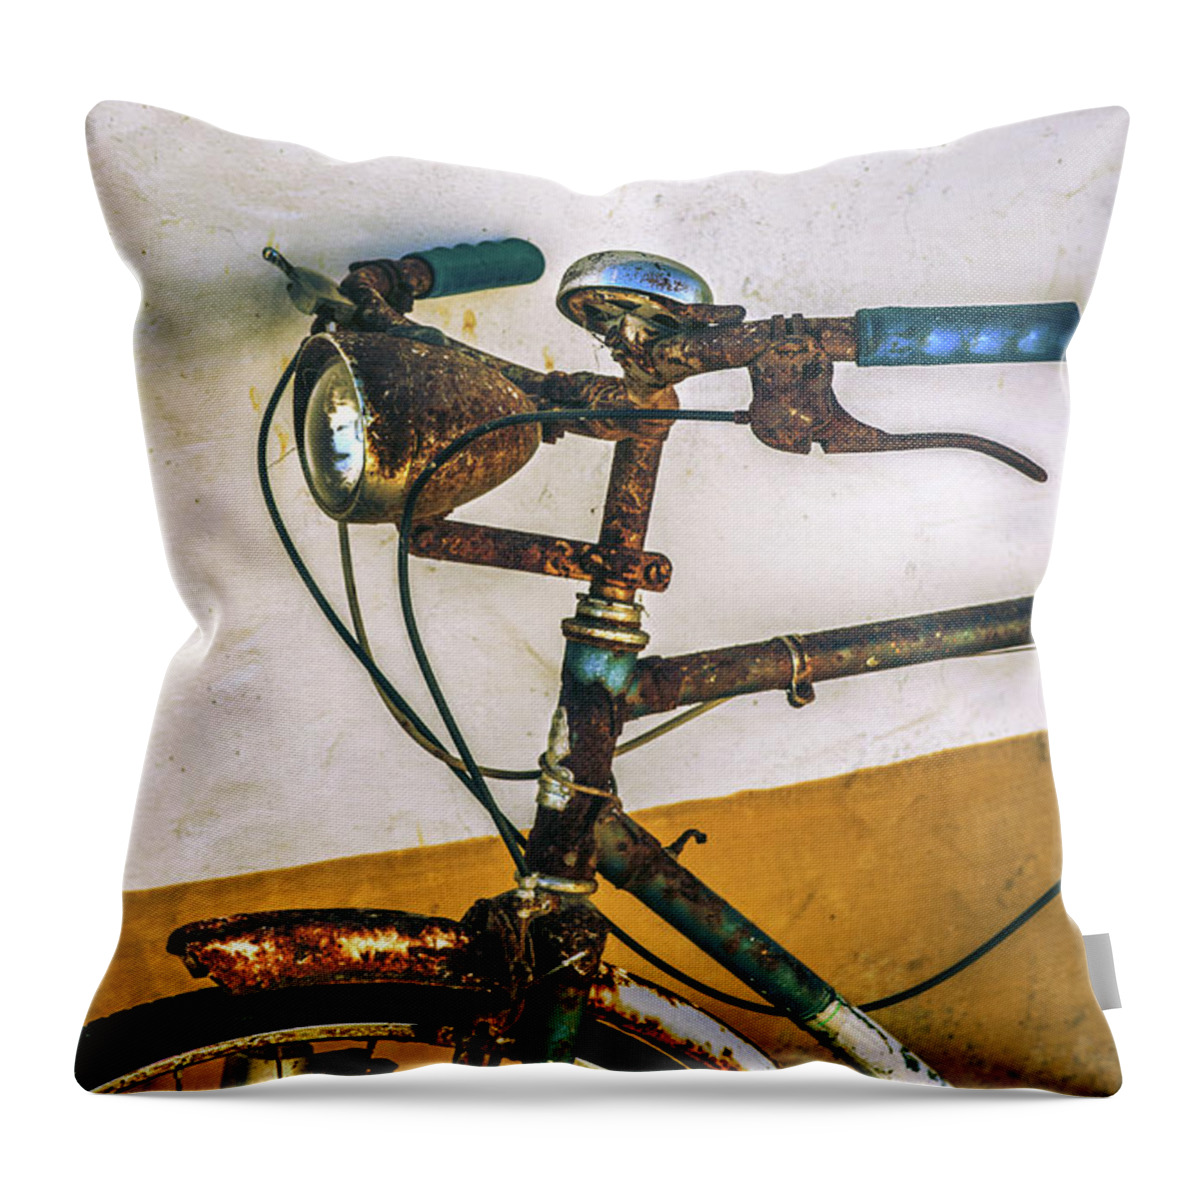 Bicycle Throw Pillow featuring the photograph Old Bicycle Detail by Carlos Caetano